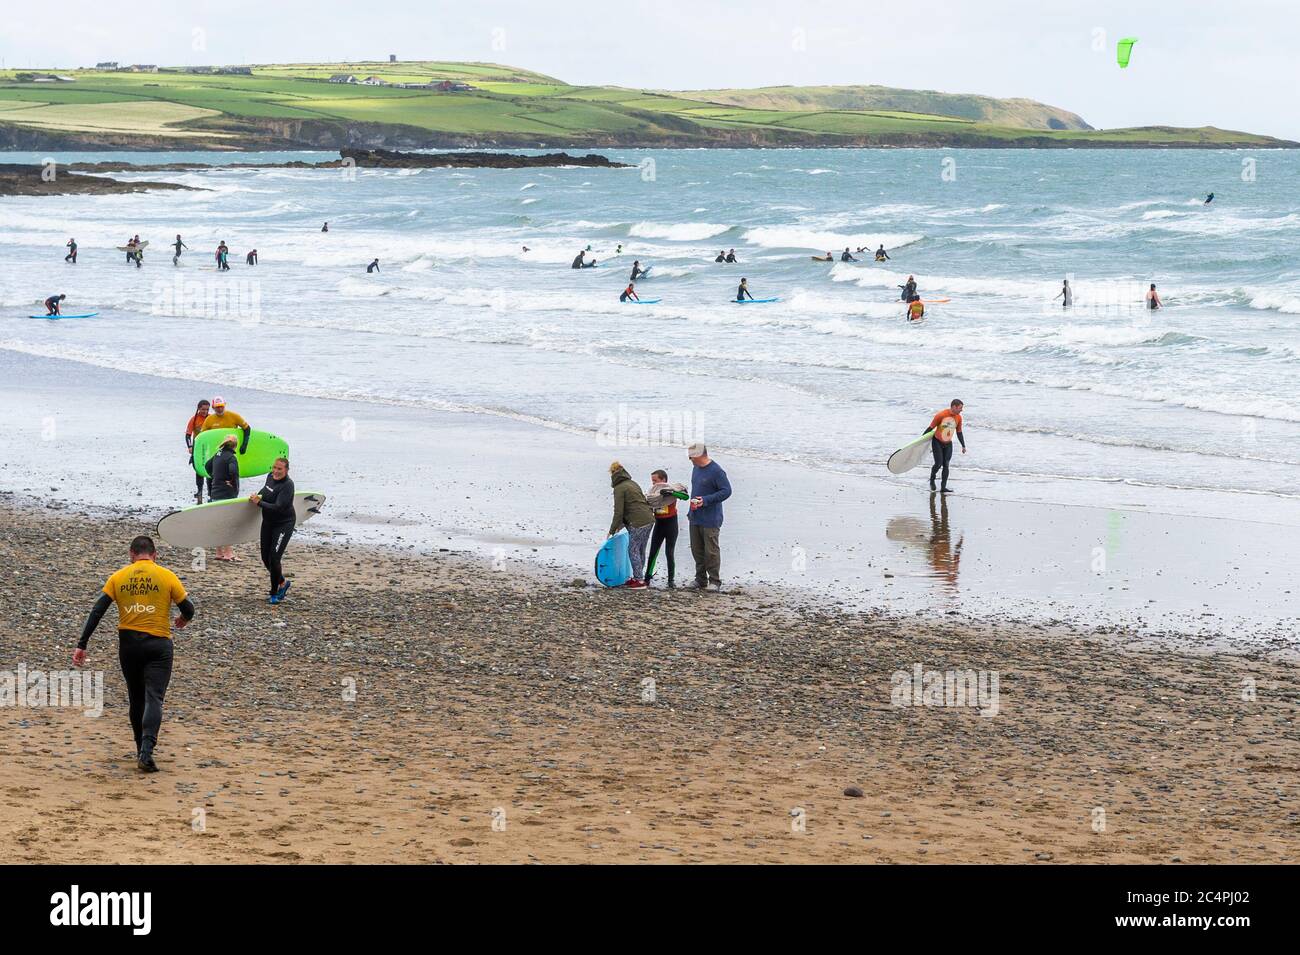 Garretstown, West Cork, Ireland. 28th June, 2020. On a very windy day at Garretstown Beach, there was a crowd of people attempting to surf some waves. Credit: AG News/Alamy Live News Stock Photo